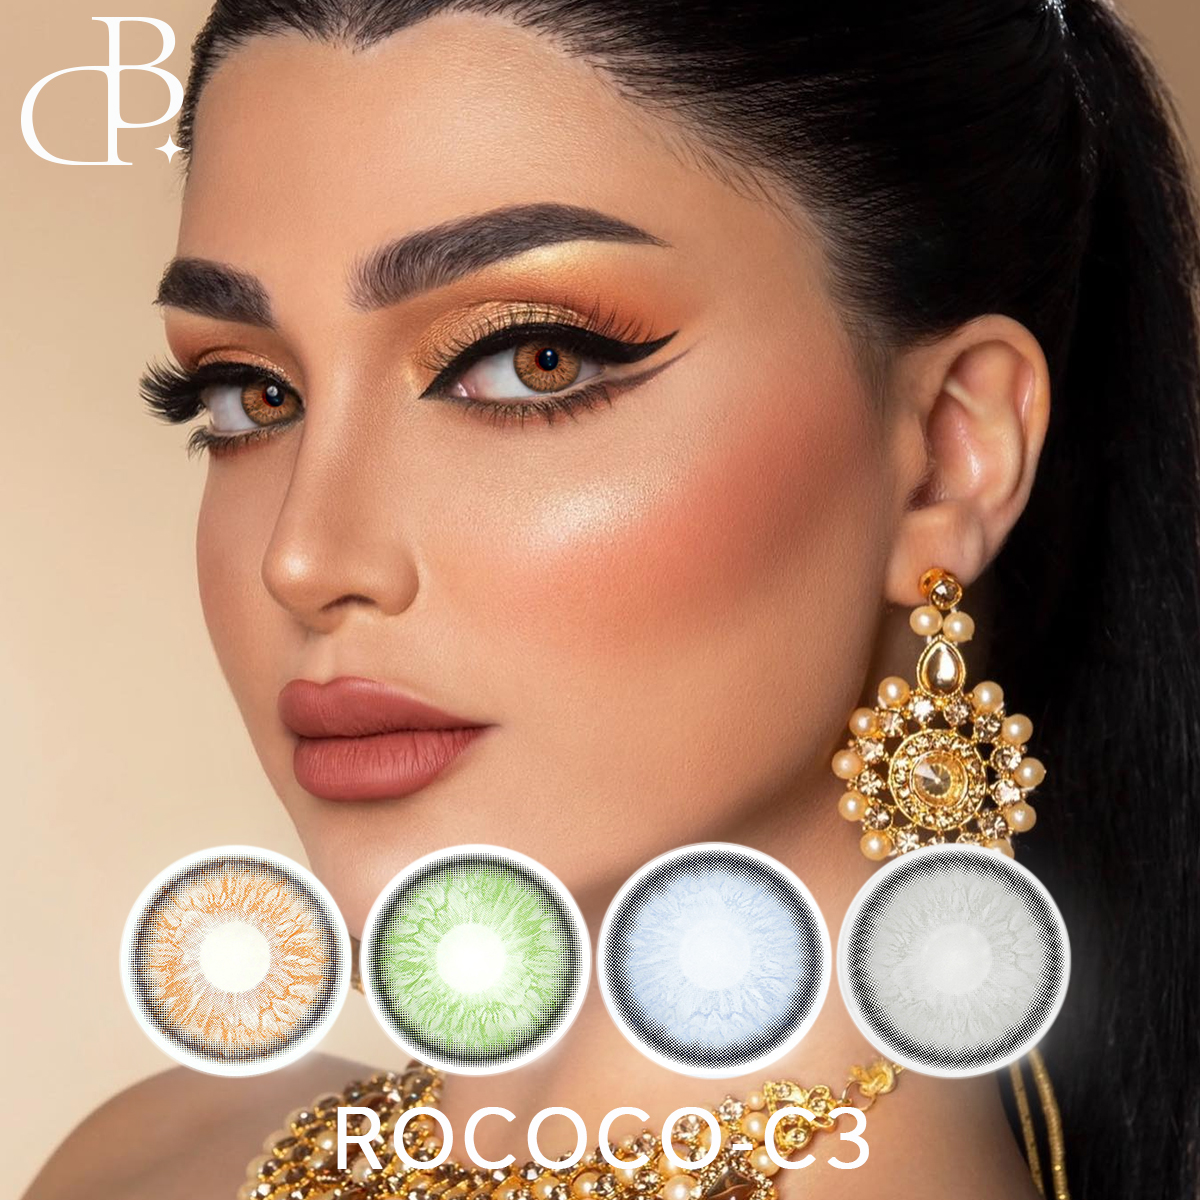 https://www.dblenses.com/rococo-3-new-looking-cosmetic-wholesale-color-contact-lens-cheap-soft-yearly-eye-coloured-contact-lenses-product/